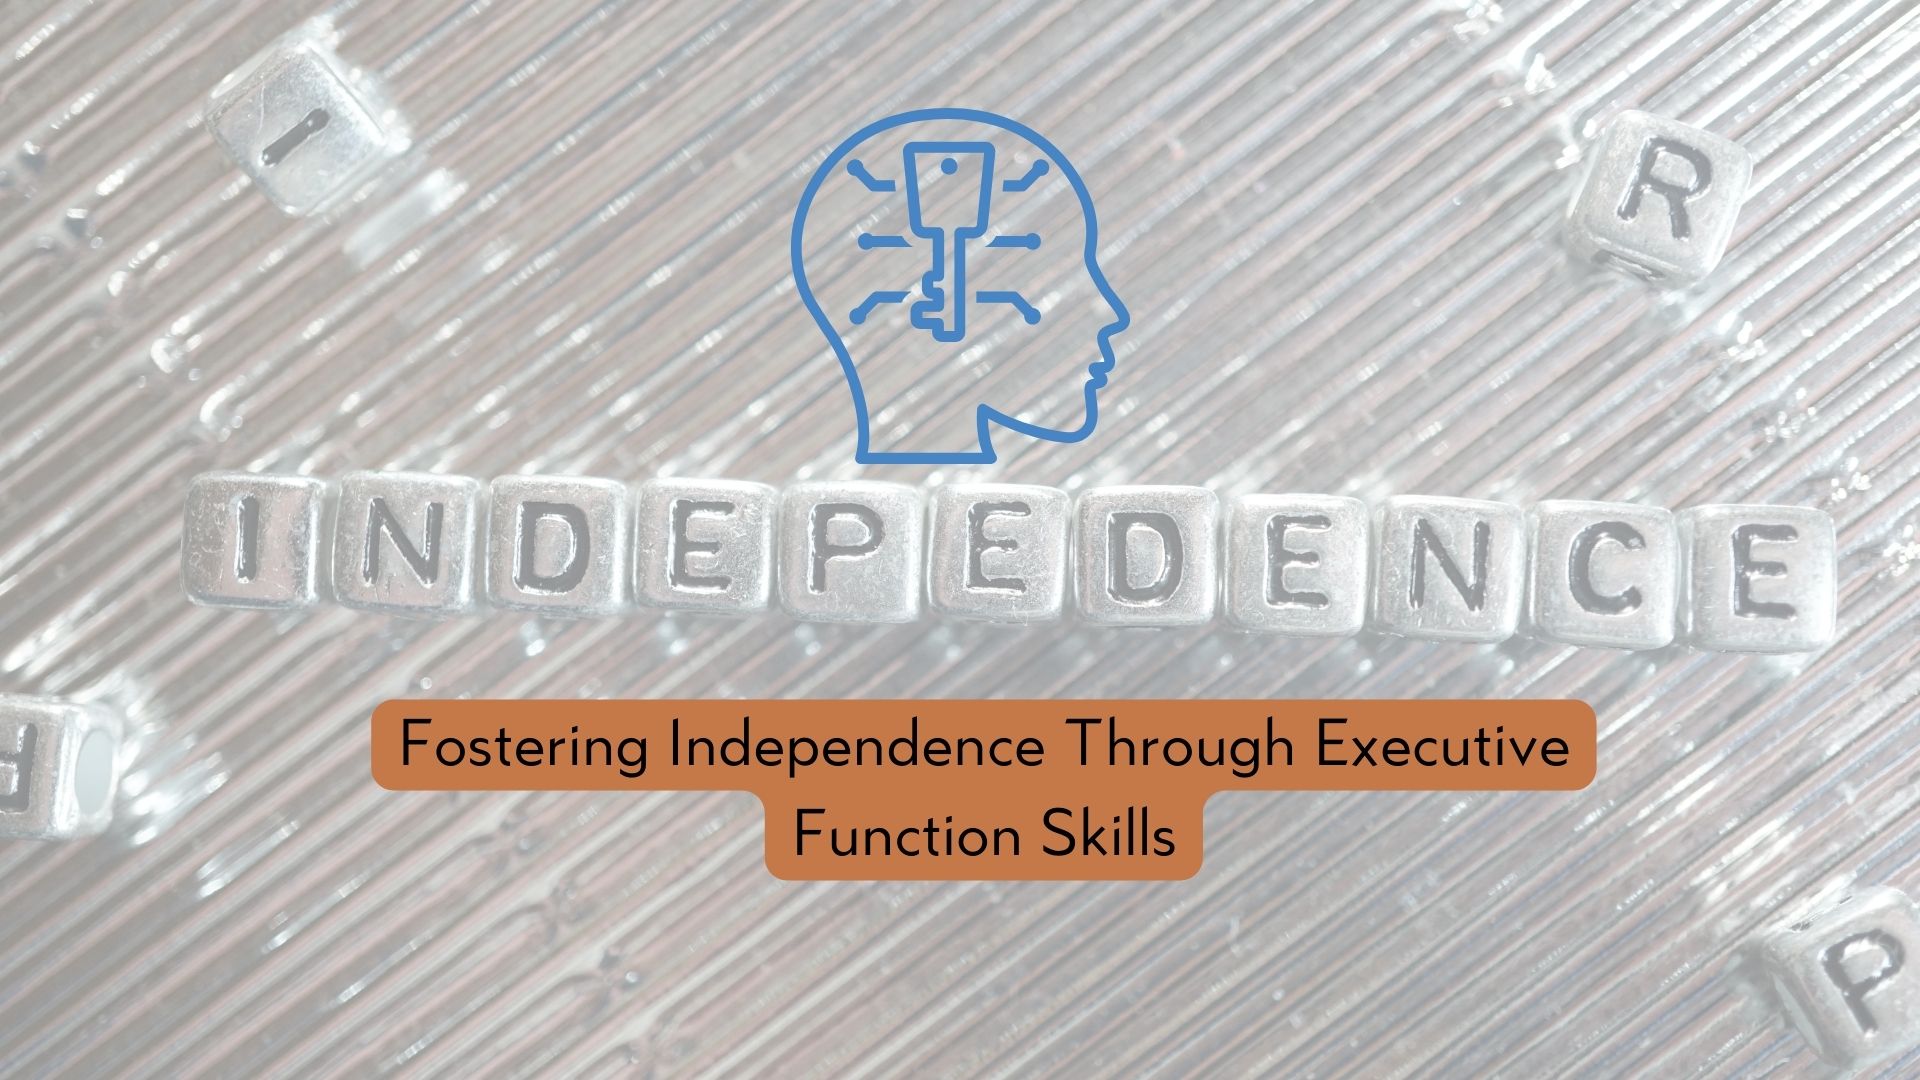 independence and executive function skills